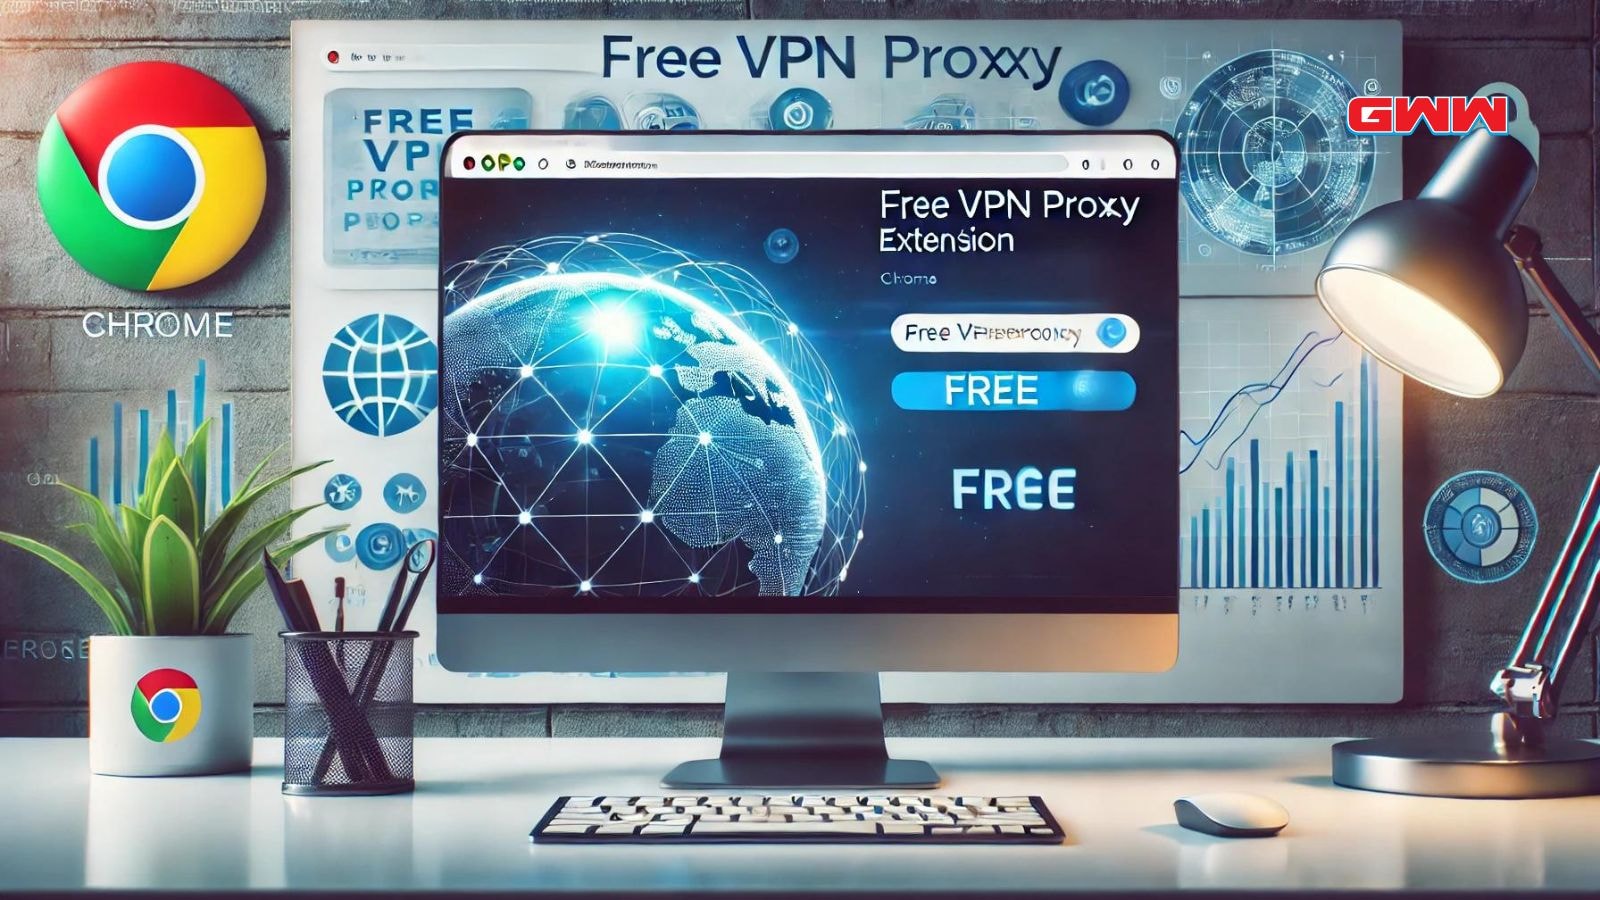 A wide image of a computer screen with the Chrome browser open to the Chrome Web Store, showcasing a free VPN proxy extension prominently